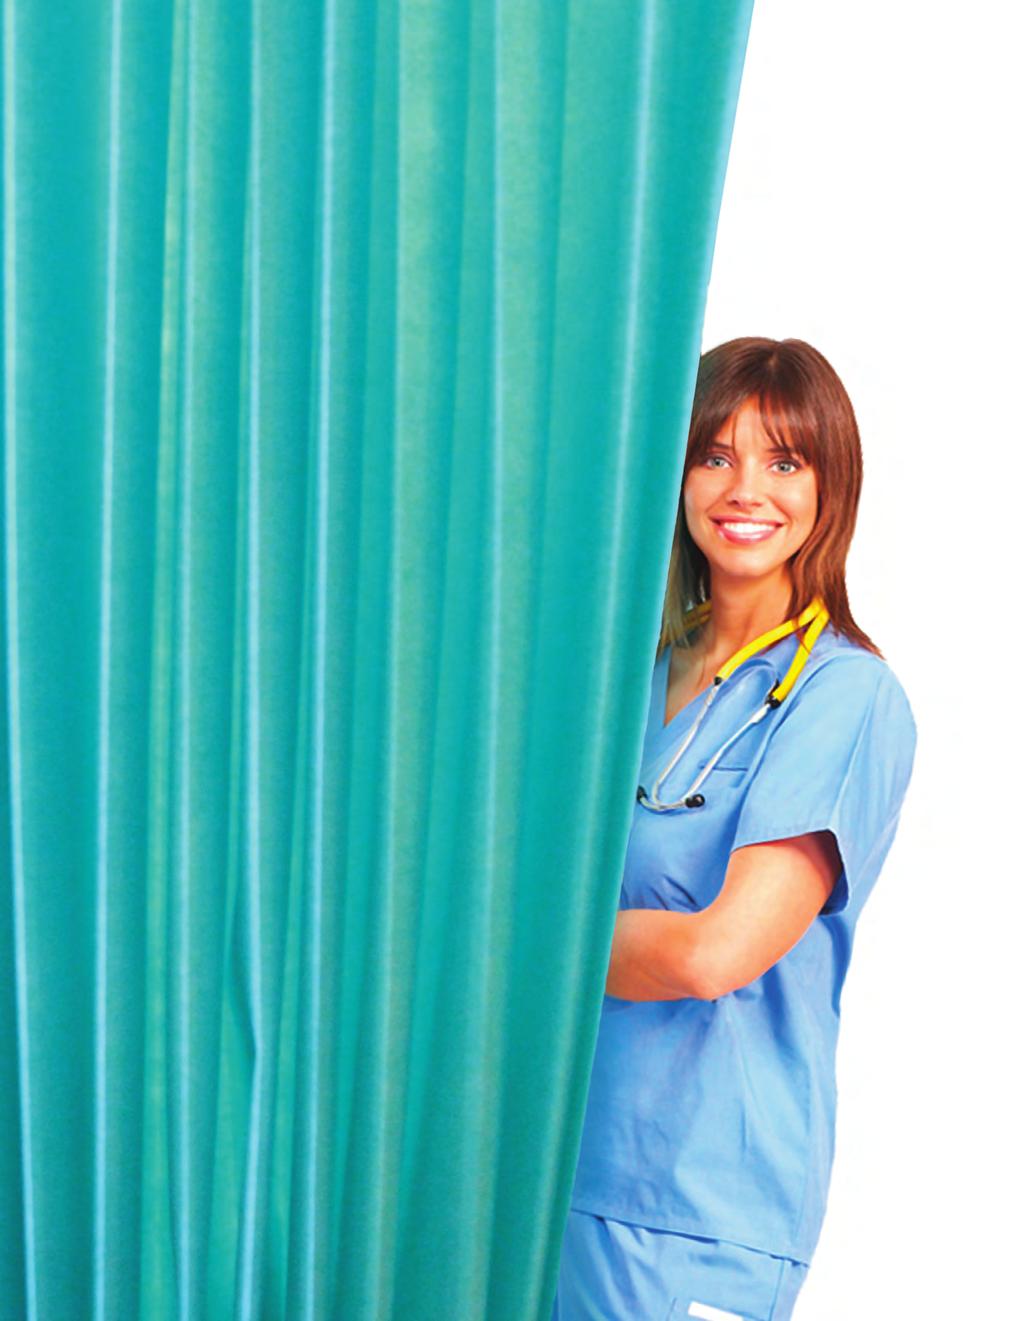 42% of traditional hospital cubicle curtains contaminated with HAIs Infection Control and